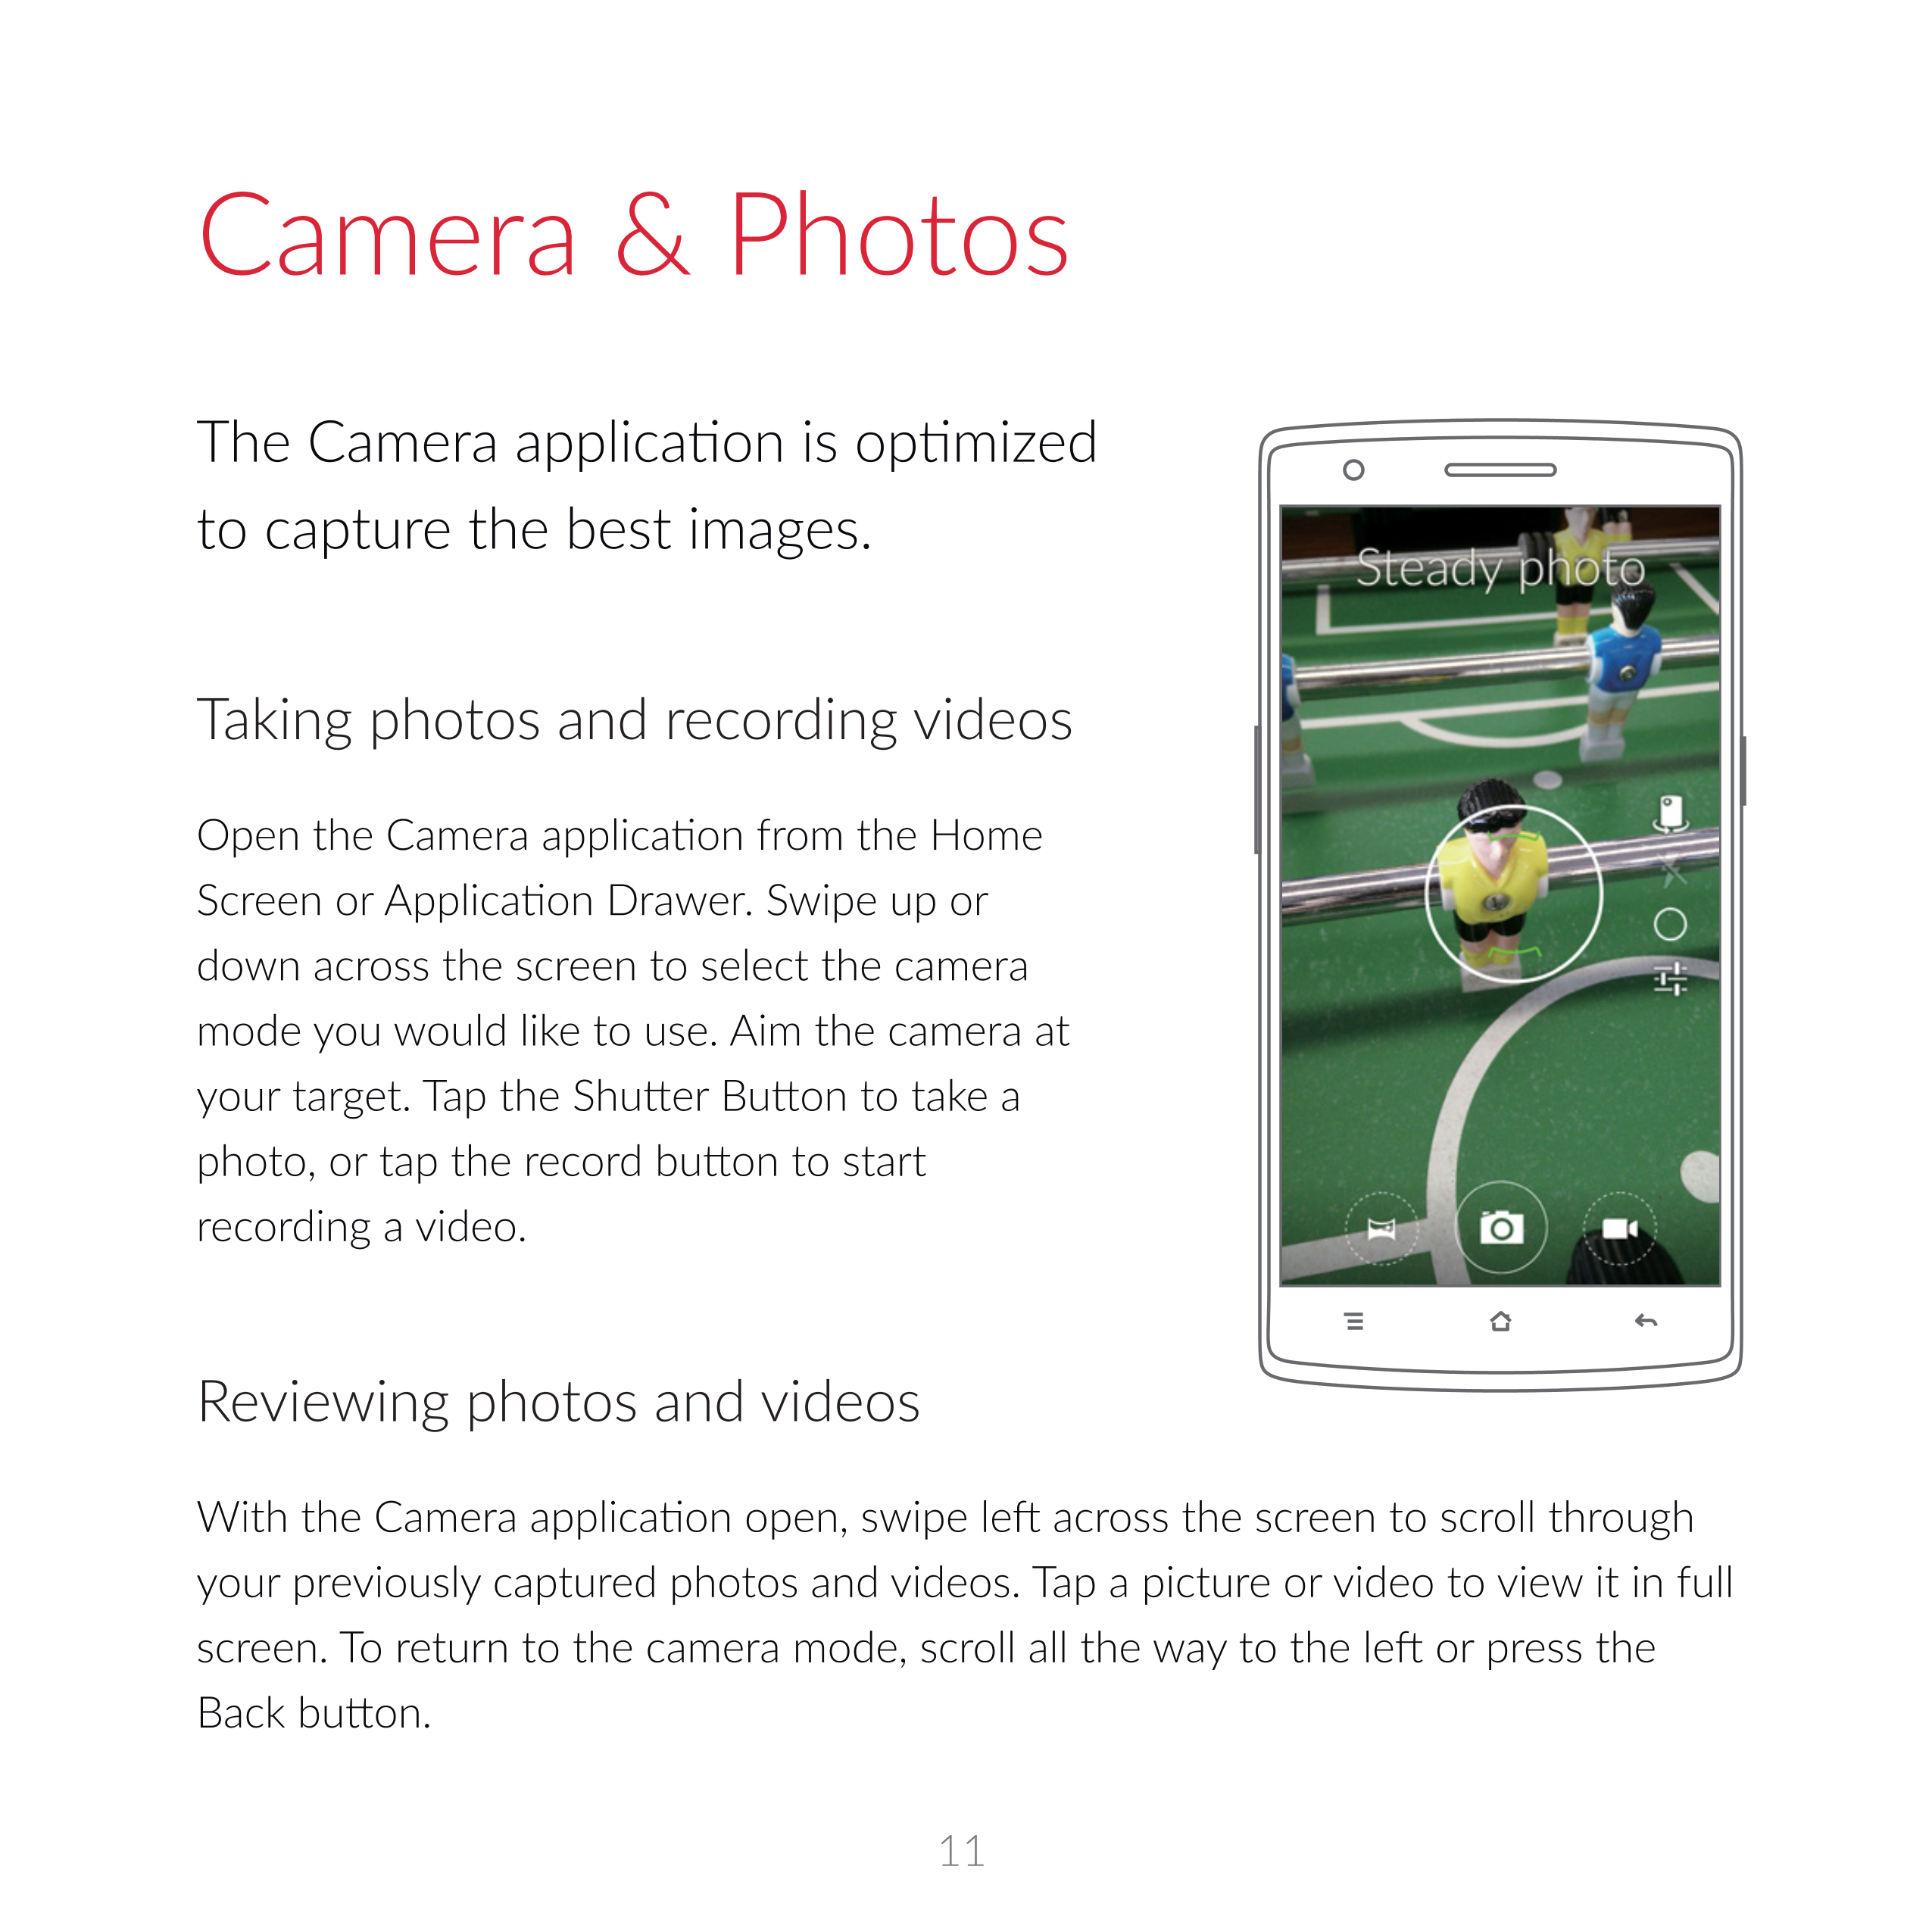 Camera &  Photos
to capture the best images.
Taking photos and  recording  videos
down across the screen to select the camera 
m